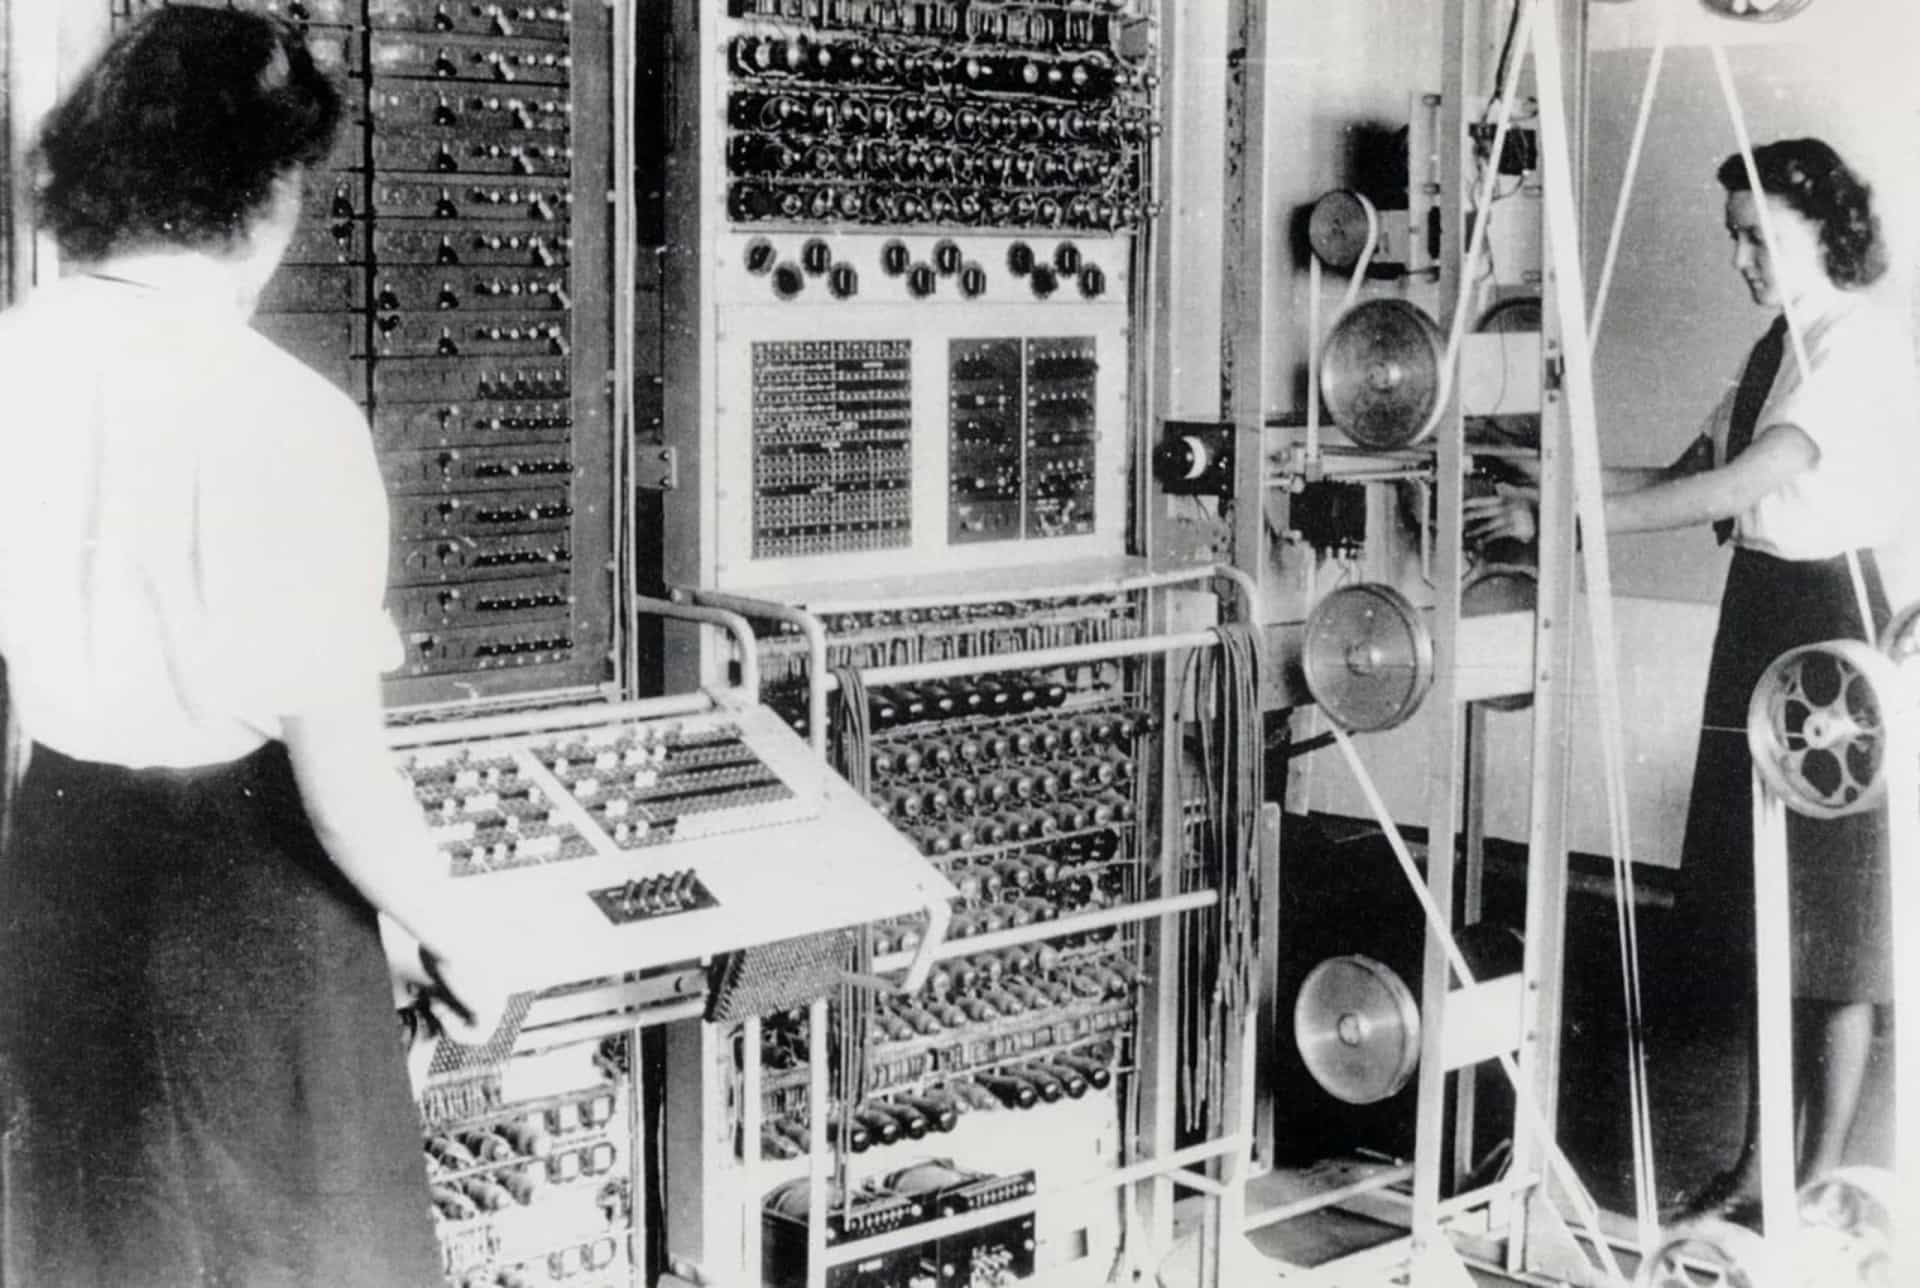 <p>Meanwhile in England, about 8,000 women were employed at Bletchley Park, the government's top-secret site for British cryptanalysts. Pictured are two employees at the Colossus Mark 2 codebreaking computer.</p><p><a href="https://www.msn.com/en-us/community/channel/vid-7xx8mnucu55yw63we9va2gwr7uihbxwc68fxqp25x6tg4ftibpra?cvid=94631541bc0f4f89bfd59158d696ad7e">Follow us and access great exclusive content everyday</a></p>